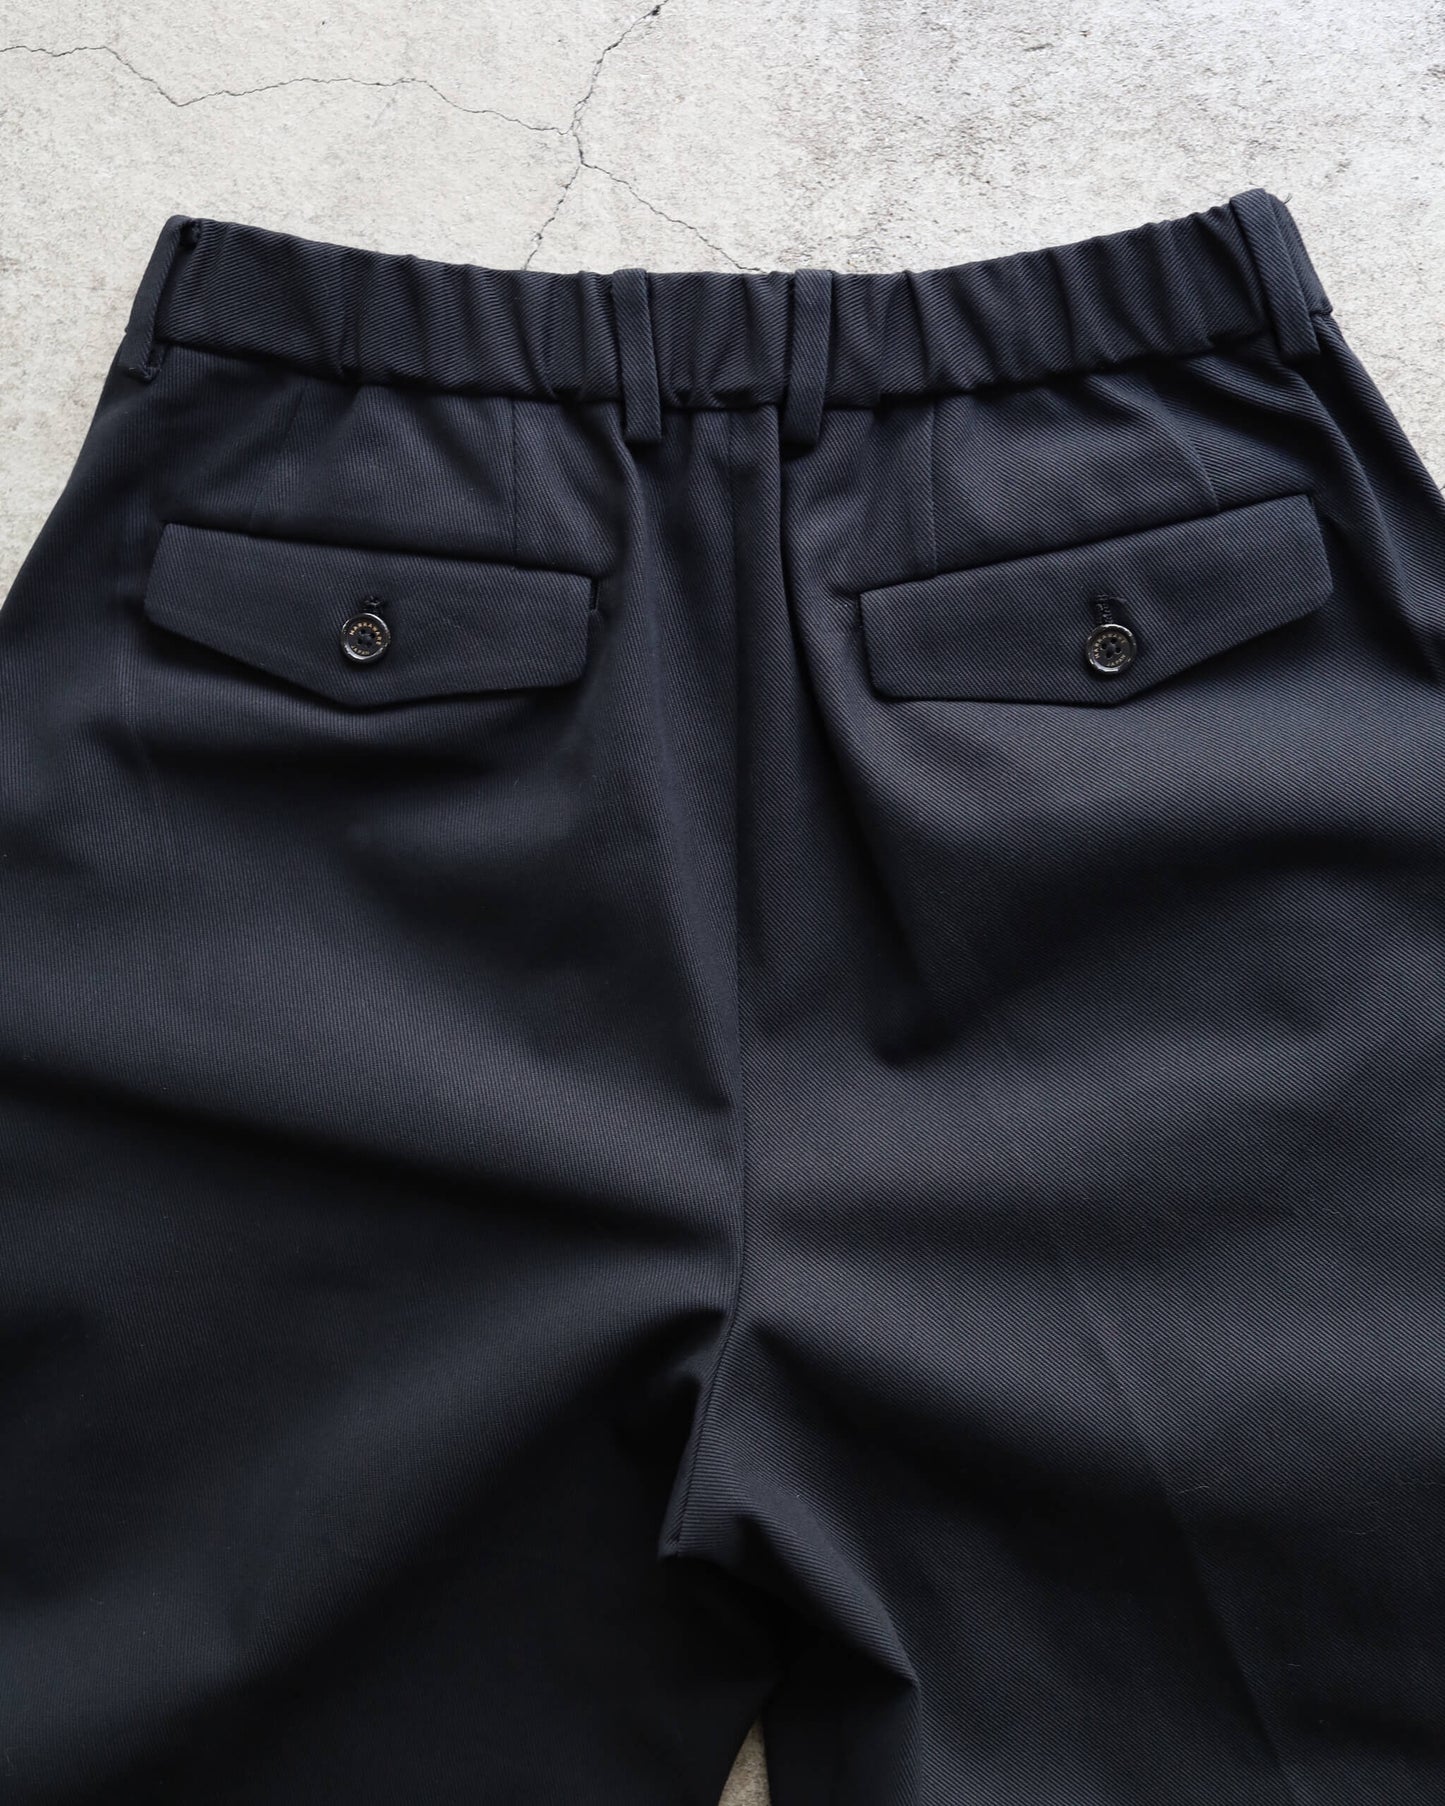 TRIPLE PLEATED WIDE TROUSERS ORGANIC COTTON SURVIVAL CLOTH "BLACK"